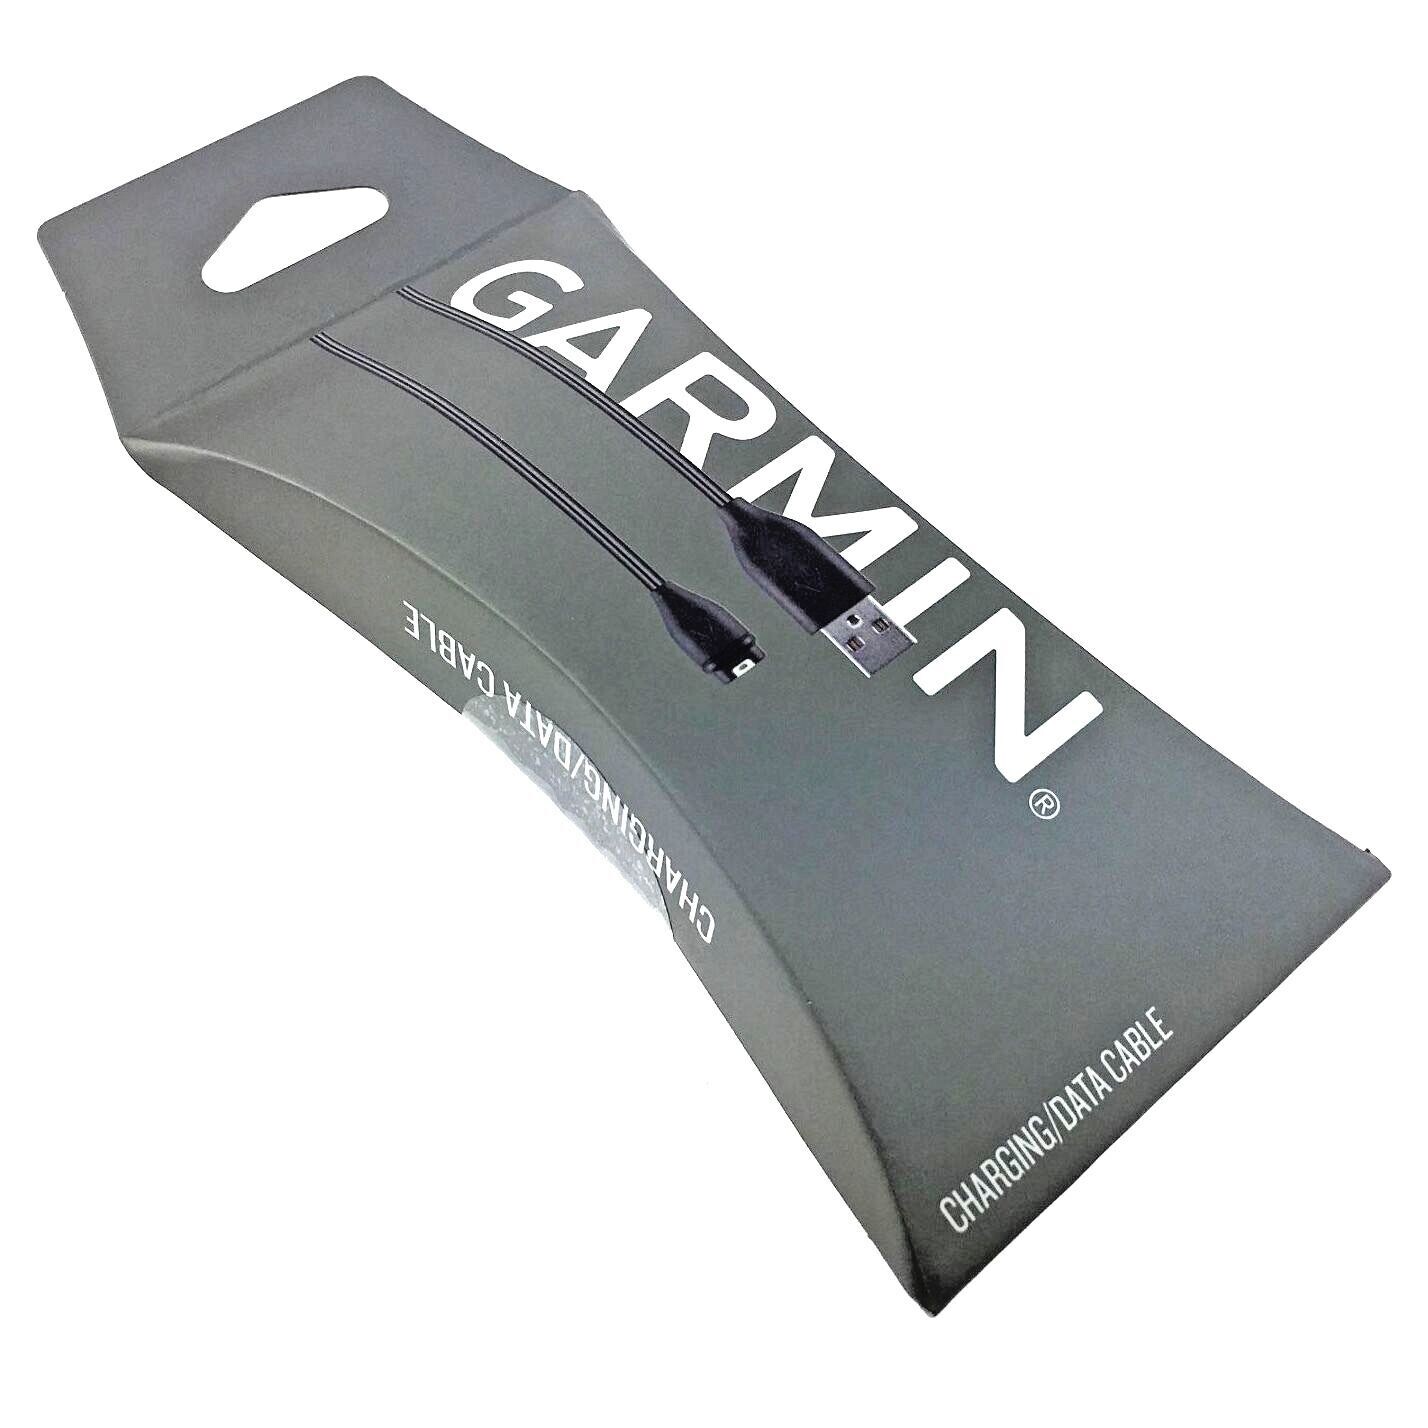 Garmin Charging/Data Cable for Fenix 5S, 5, 5X and Forerunner 935 010-12491-01